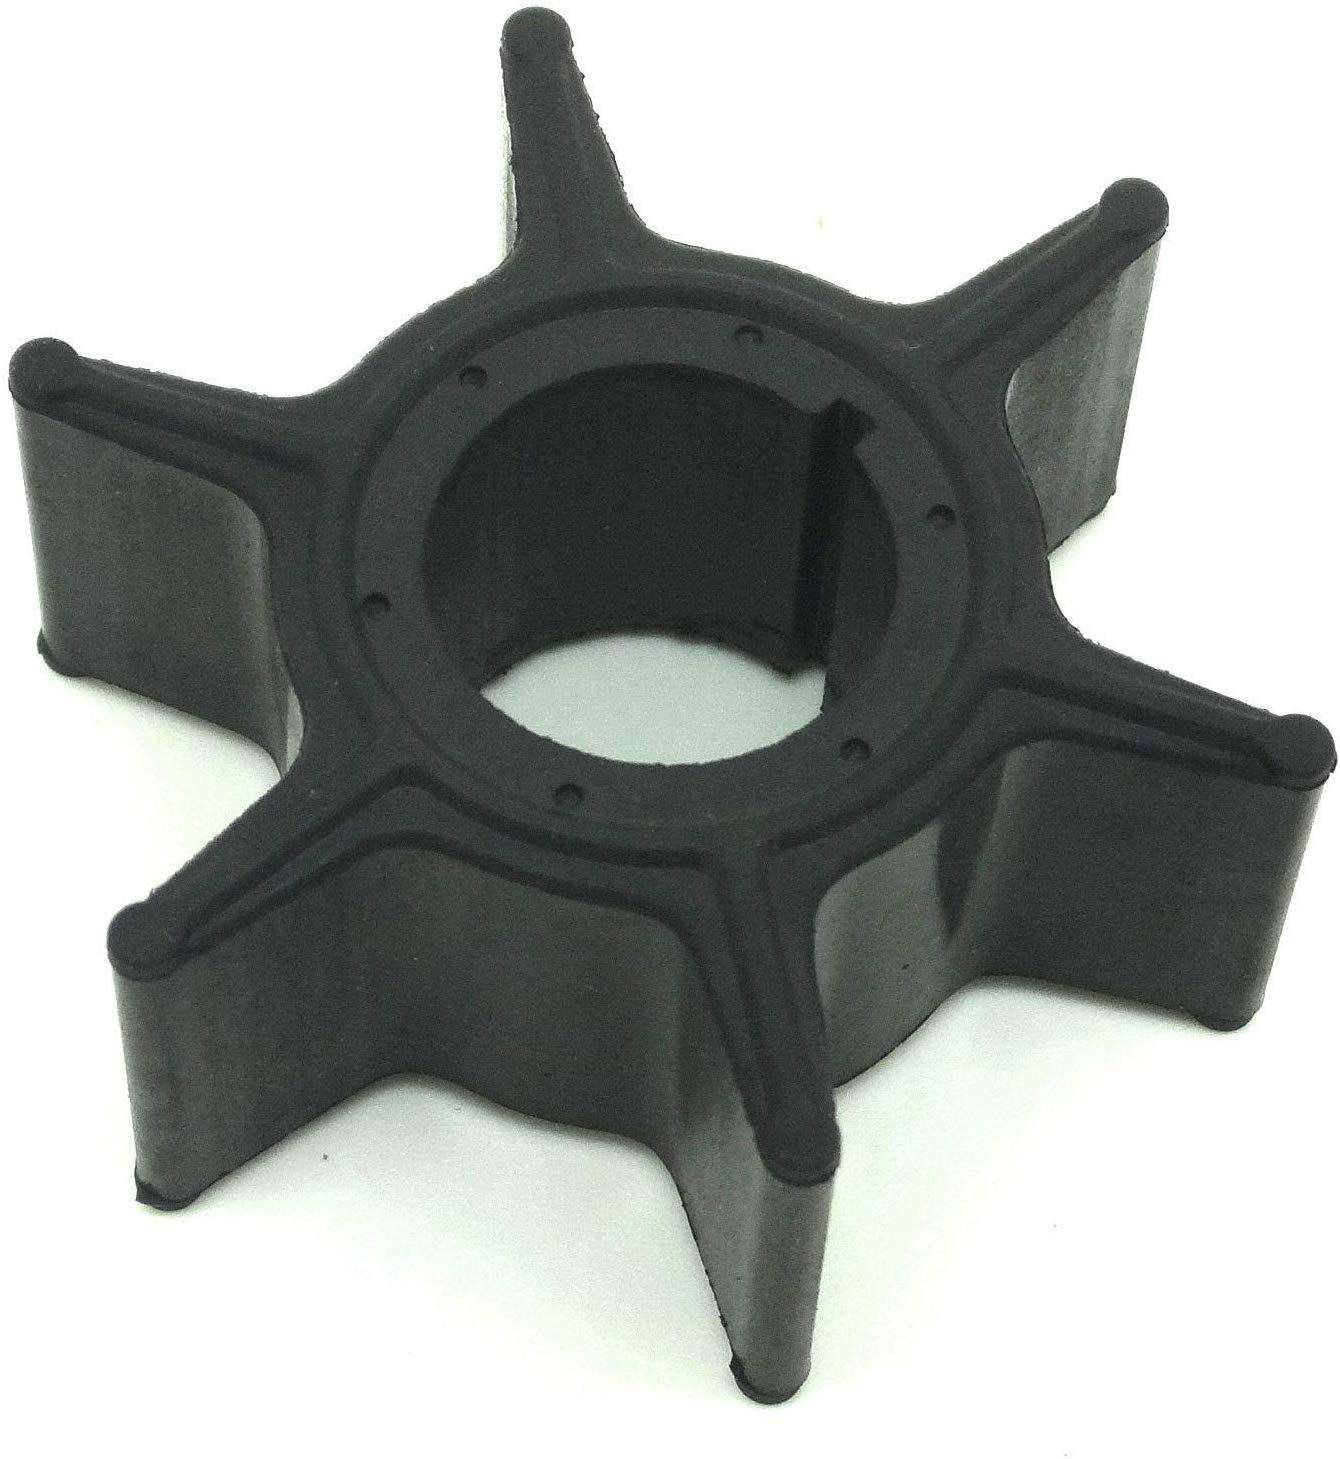 OEM Part No. 3C8-65021-2 Water Pump Impeller For Tohatsu